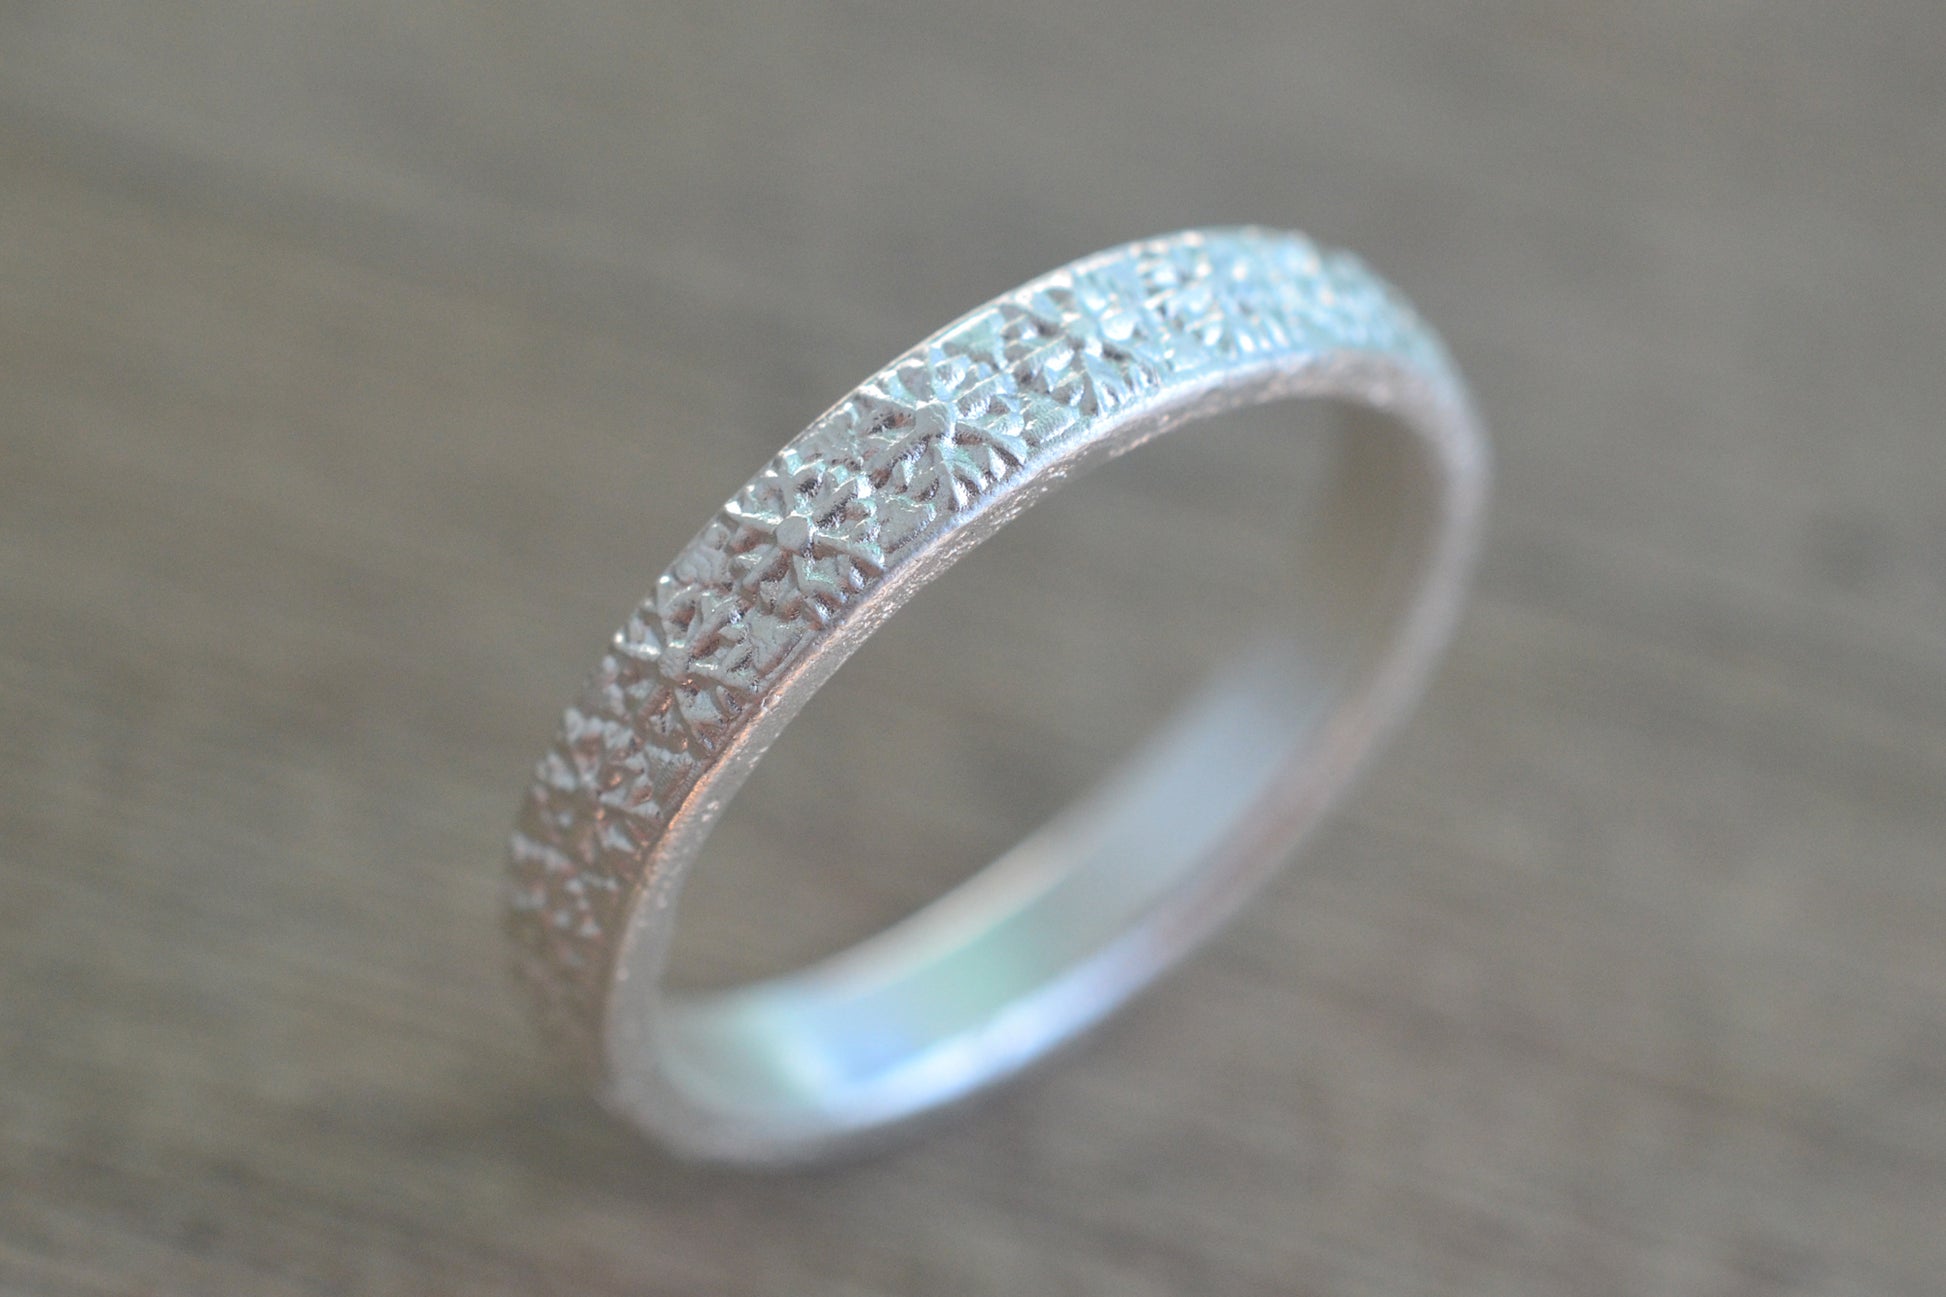 Dainty Snowflake Patterned Ring in 925 Silver